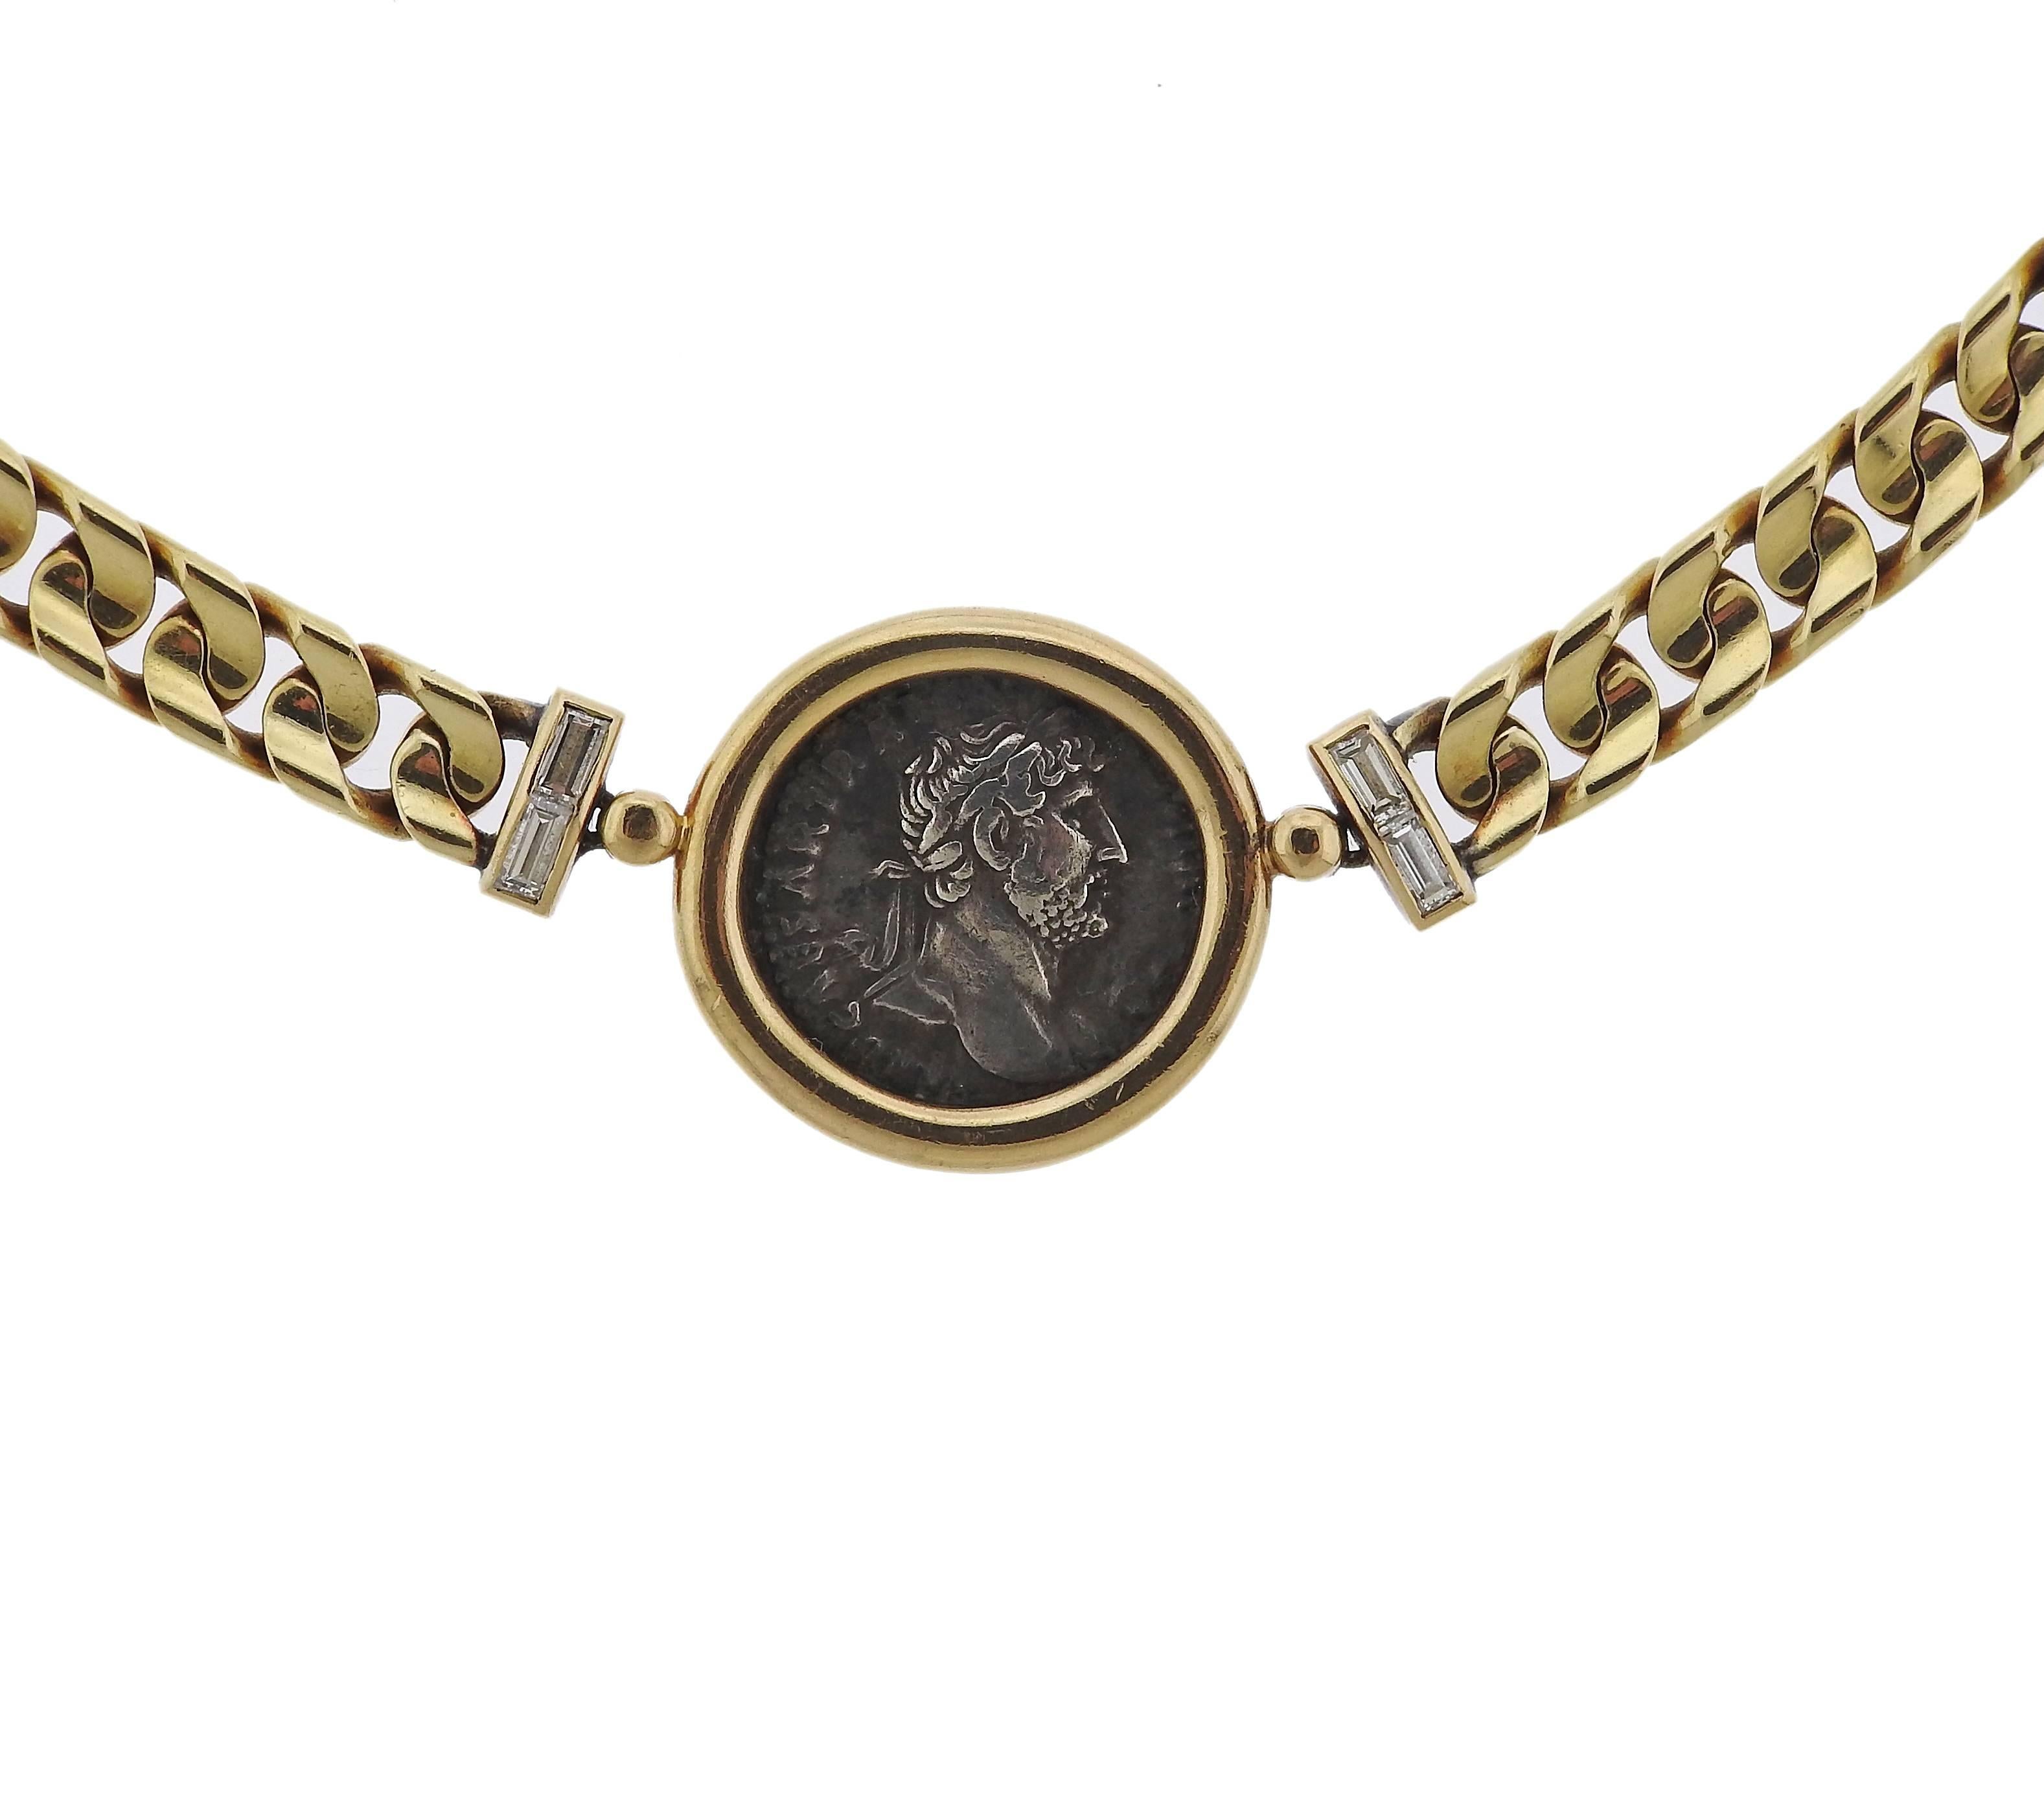 AN 18k yellow gold necklace, crafted by Bulgari, set with an ancient Roman coin in the center, surrounded with approximately 0.20ctw in diamonds. Necklace is 15 1/2